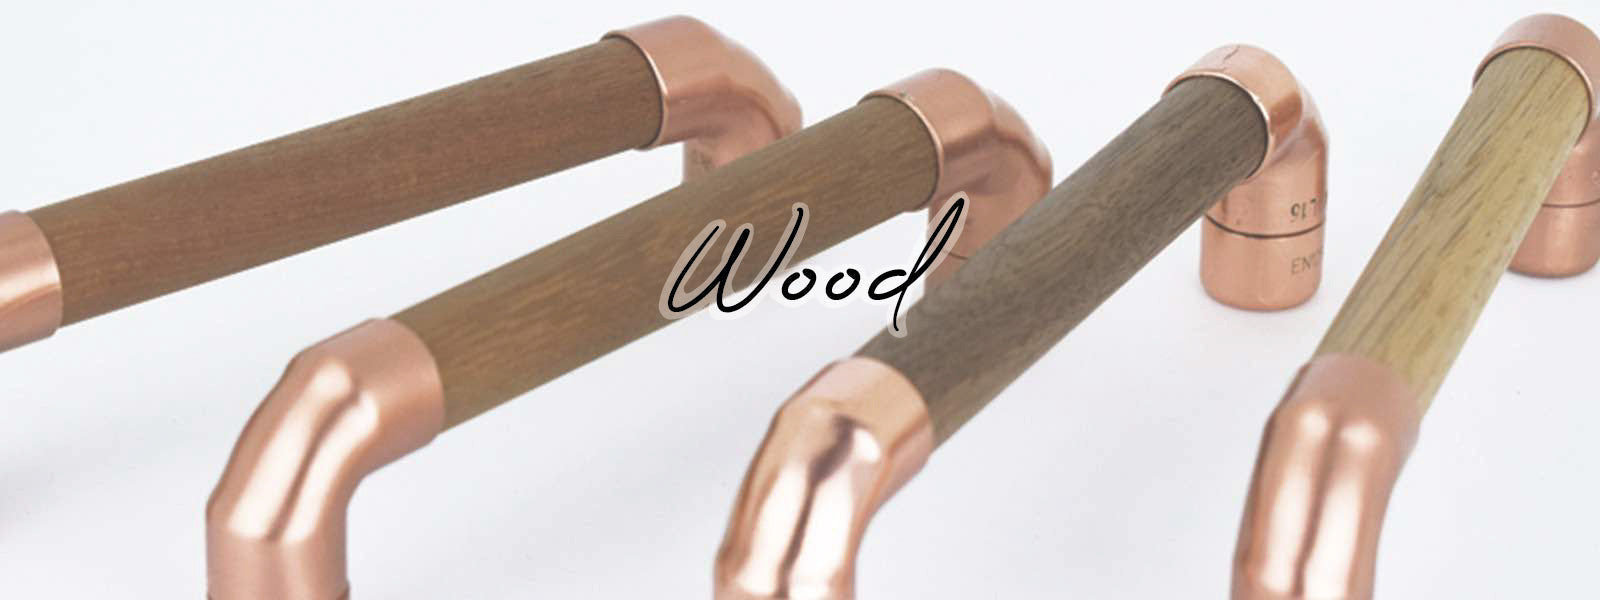 Copper and Wood Handles